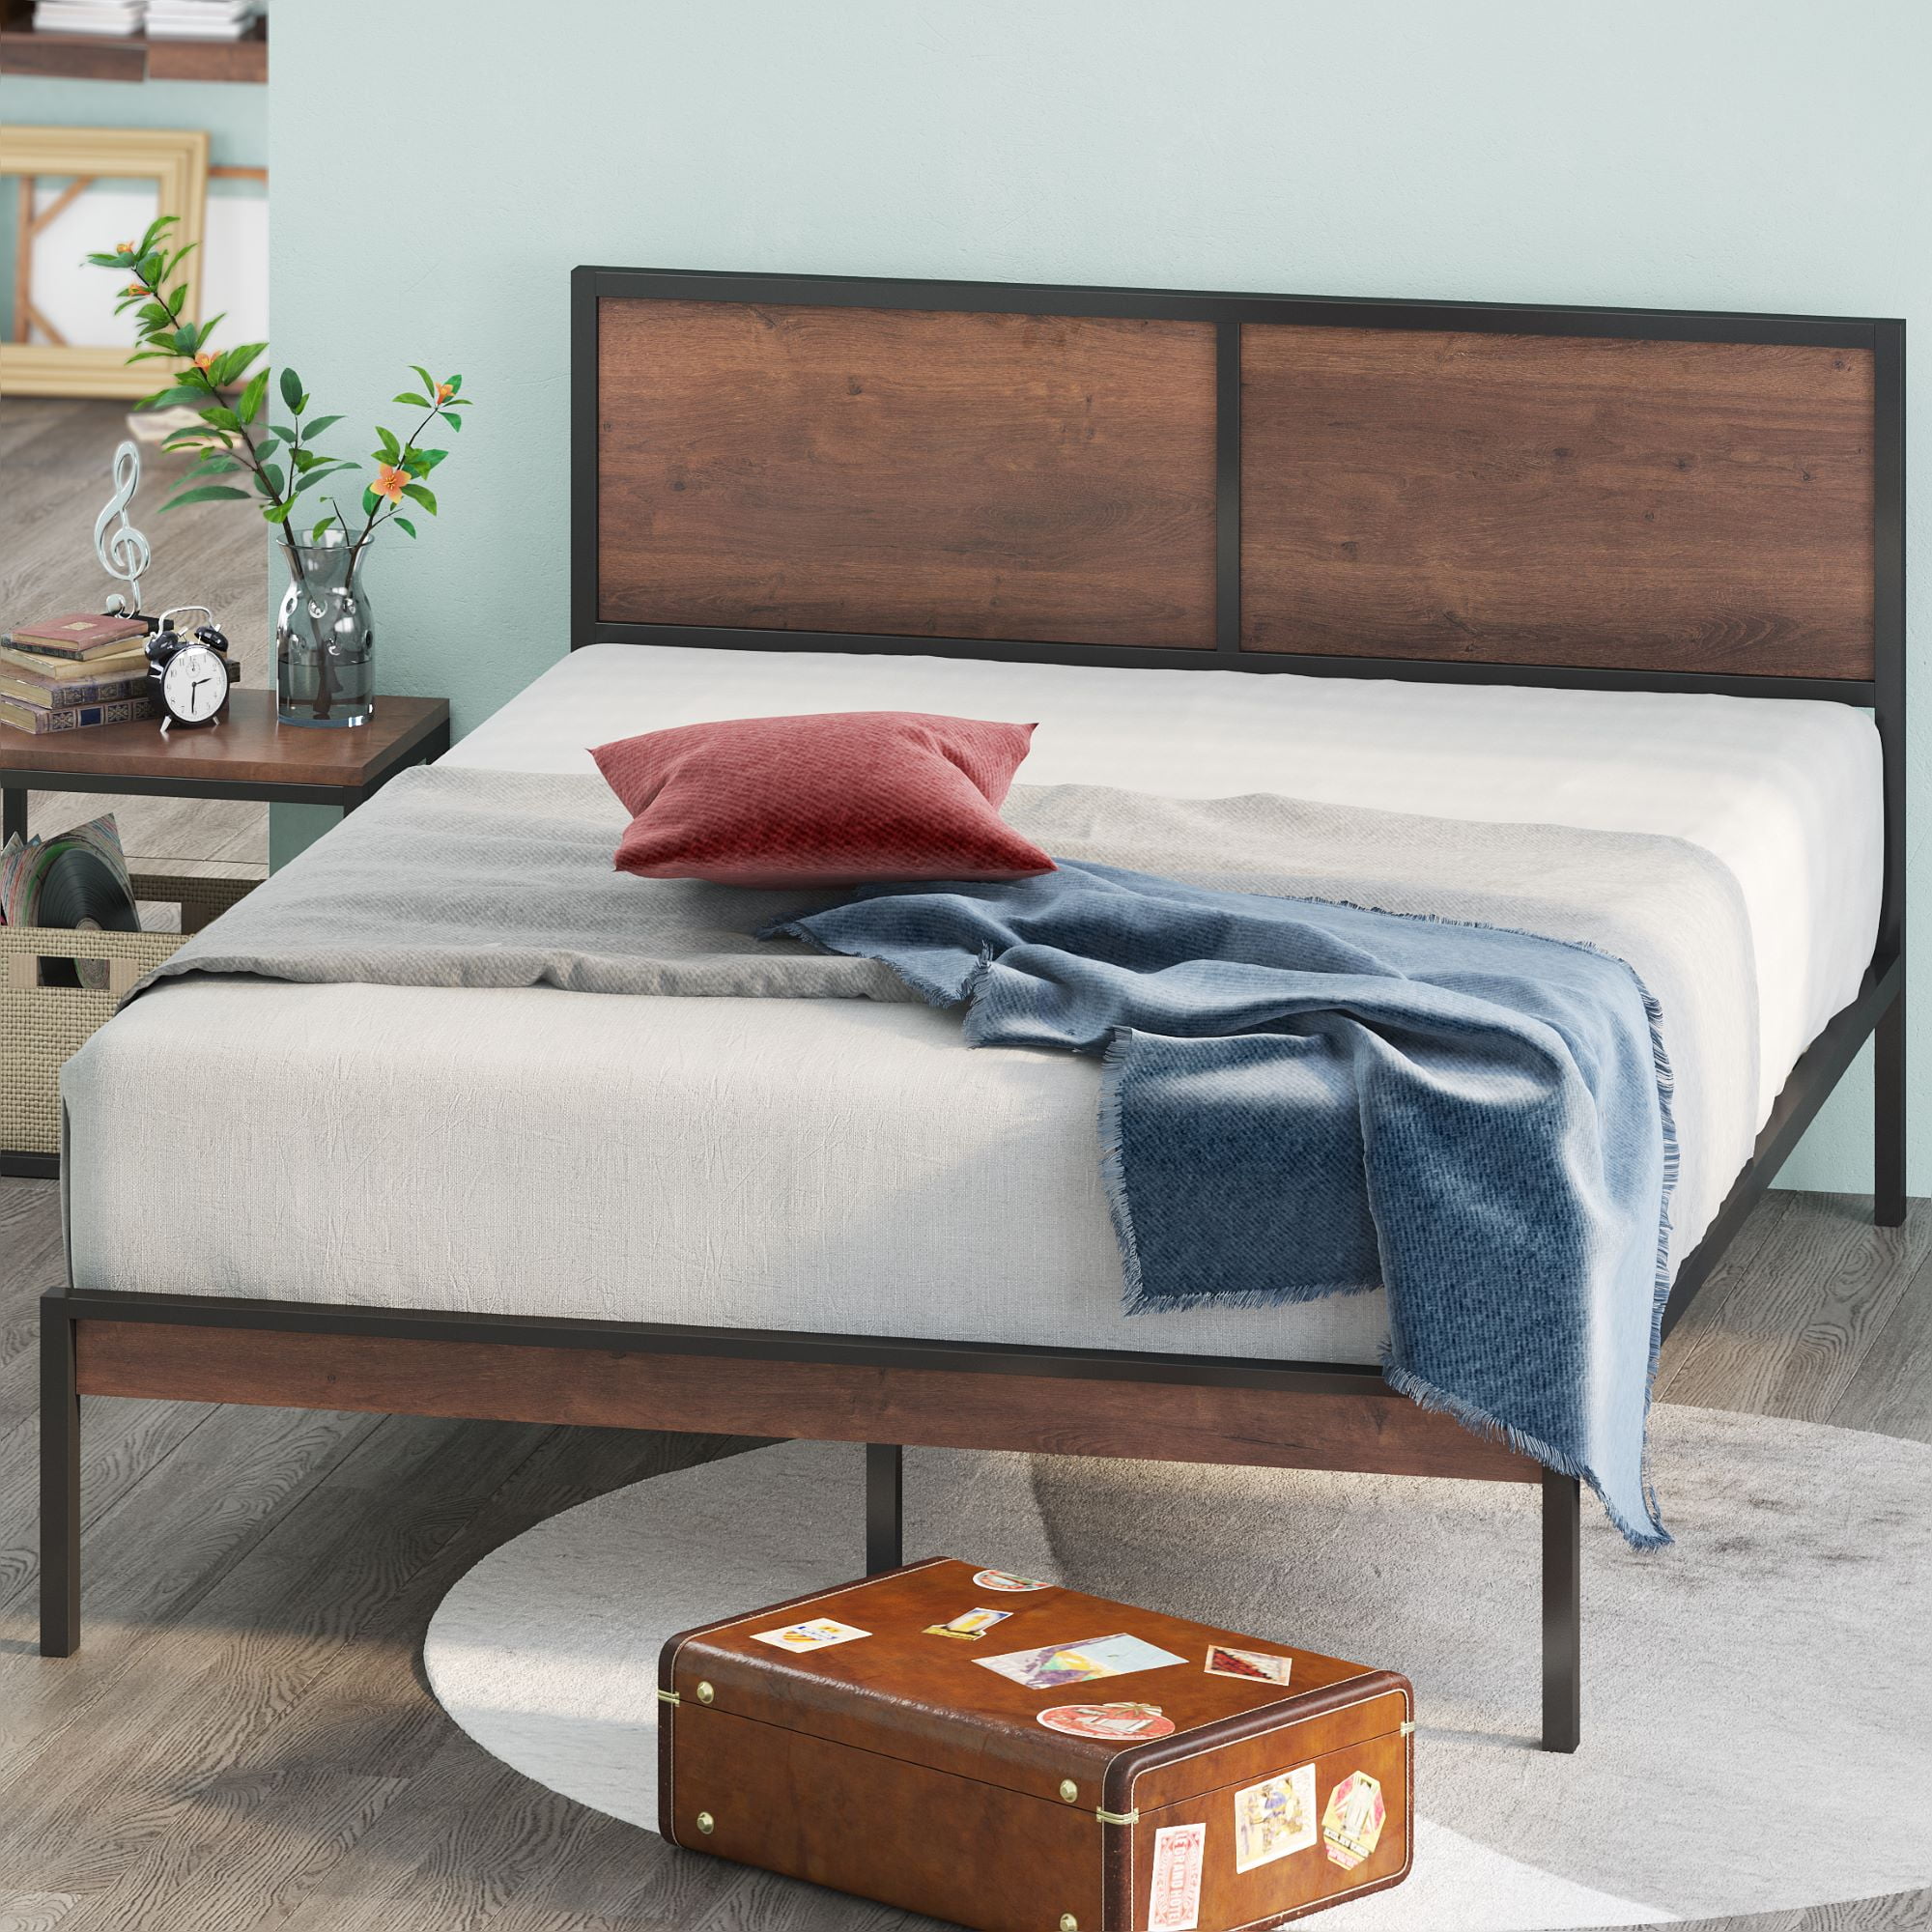 Easy Assembly Strong Wood Slat Twin/Queen/Full Wood Platform Bed w/ Headboard 